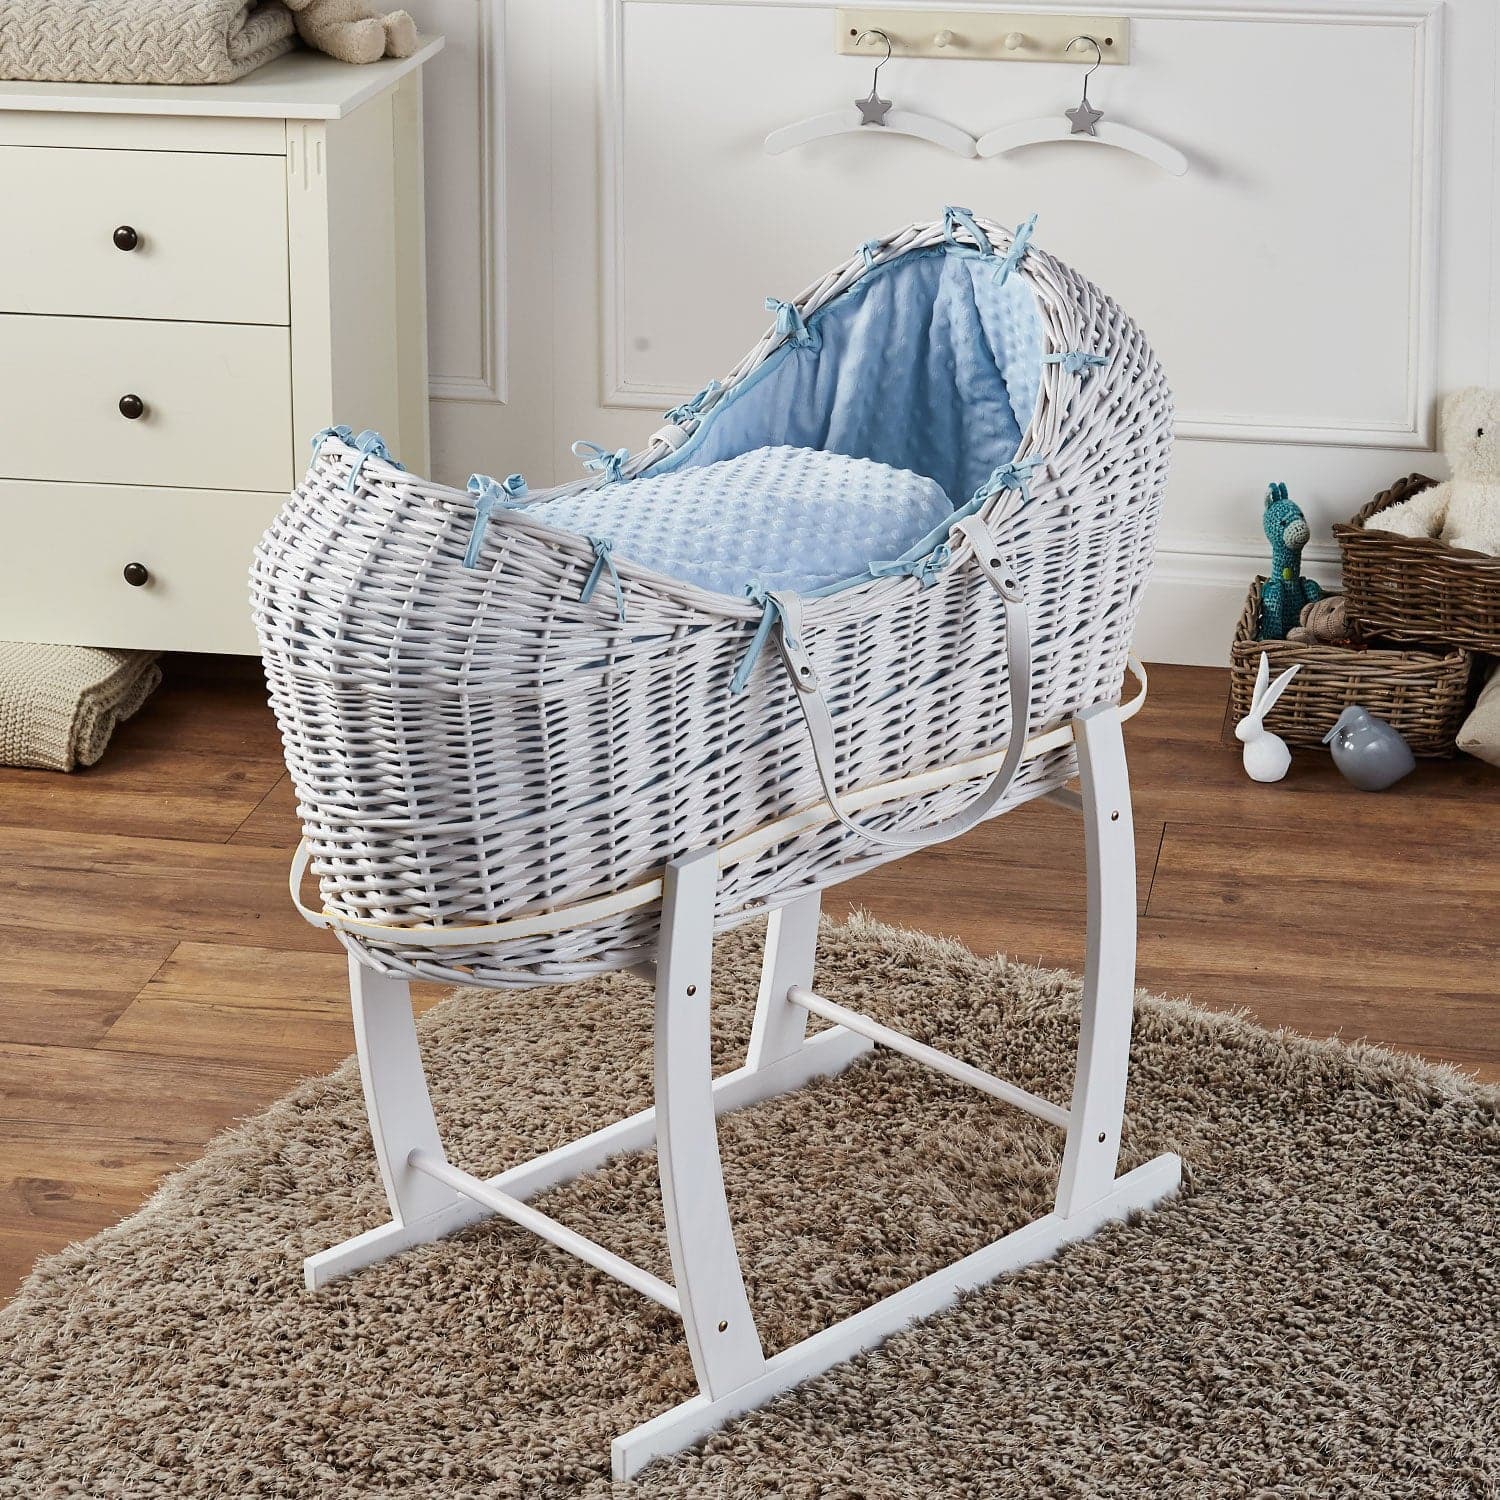 Wicker Deluxe Pod Baby Moses Basket With Stand - White / Dimple / Blue | For Your Little One